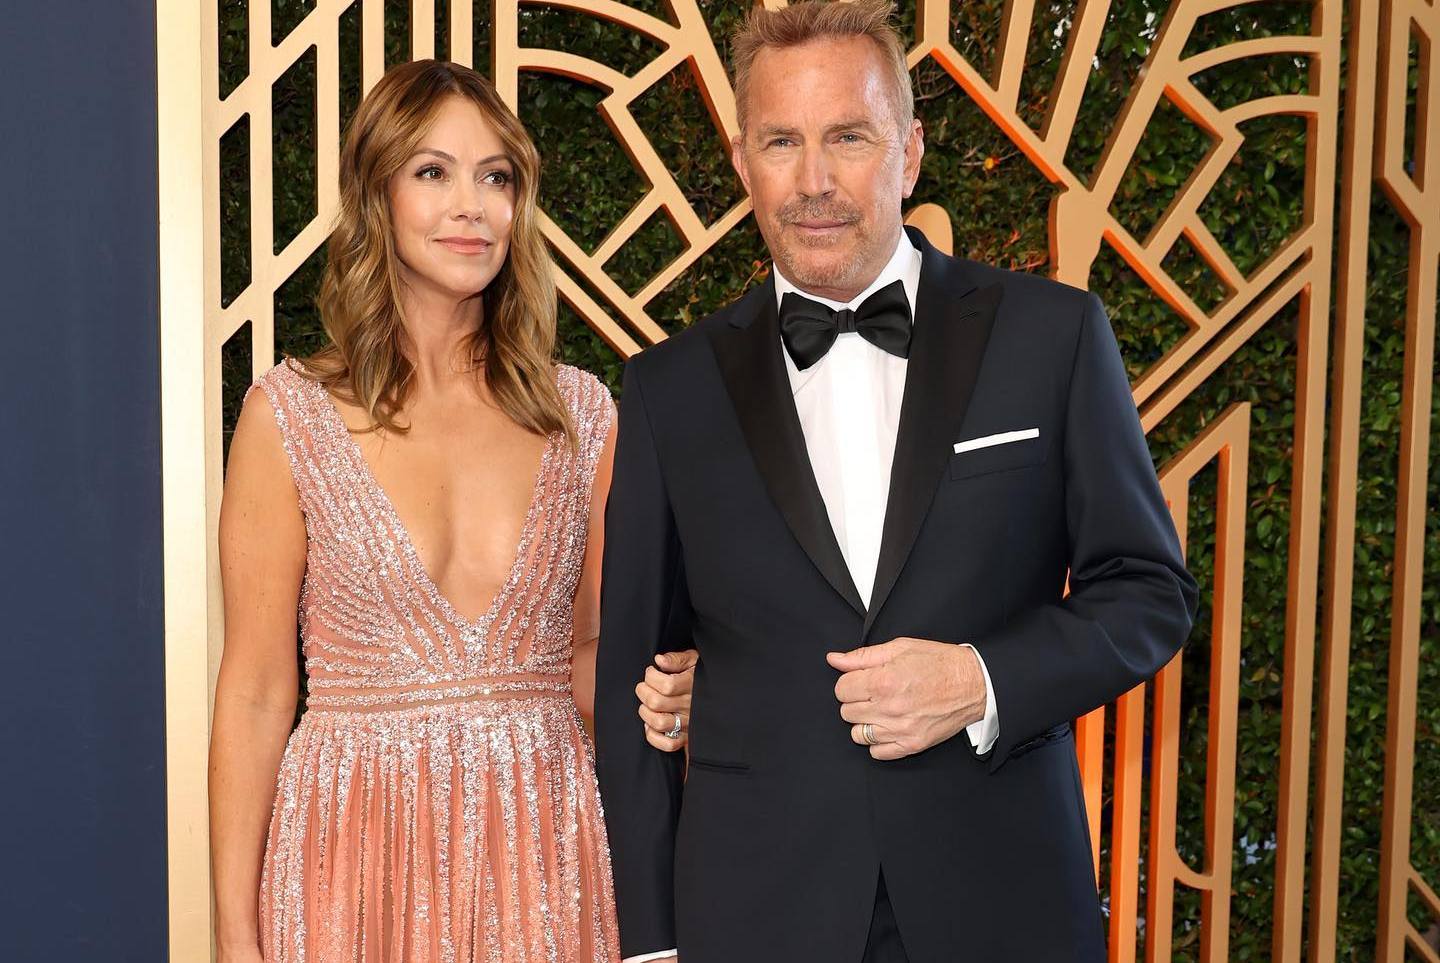 Photo shared by Kevin Costner Modern West on February 28 2022 tagging @sagawards